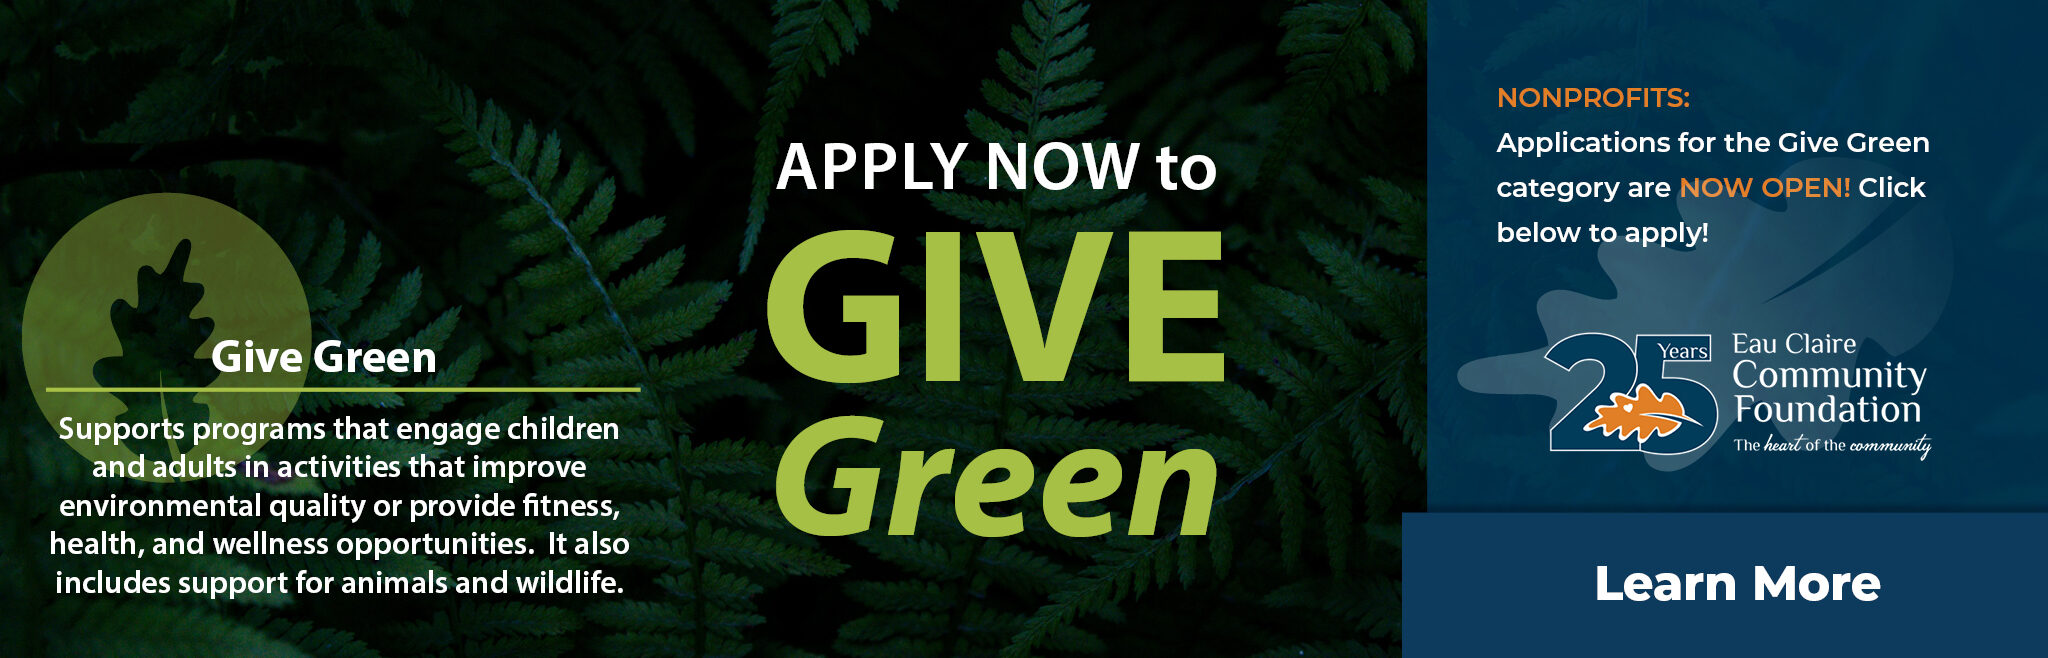 Give Green Grant Application Open